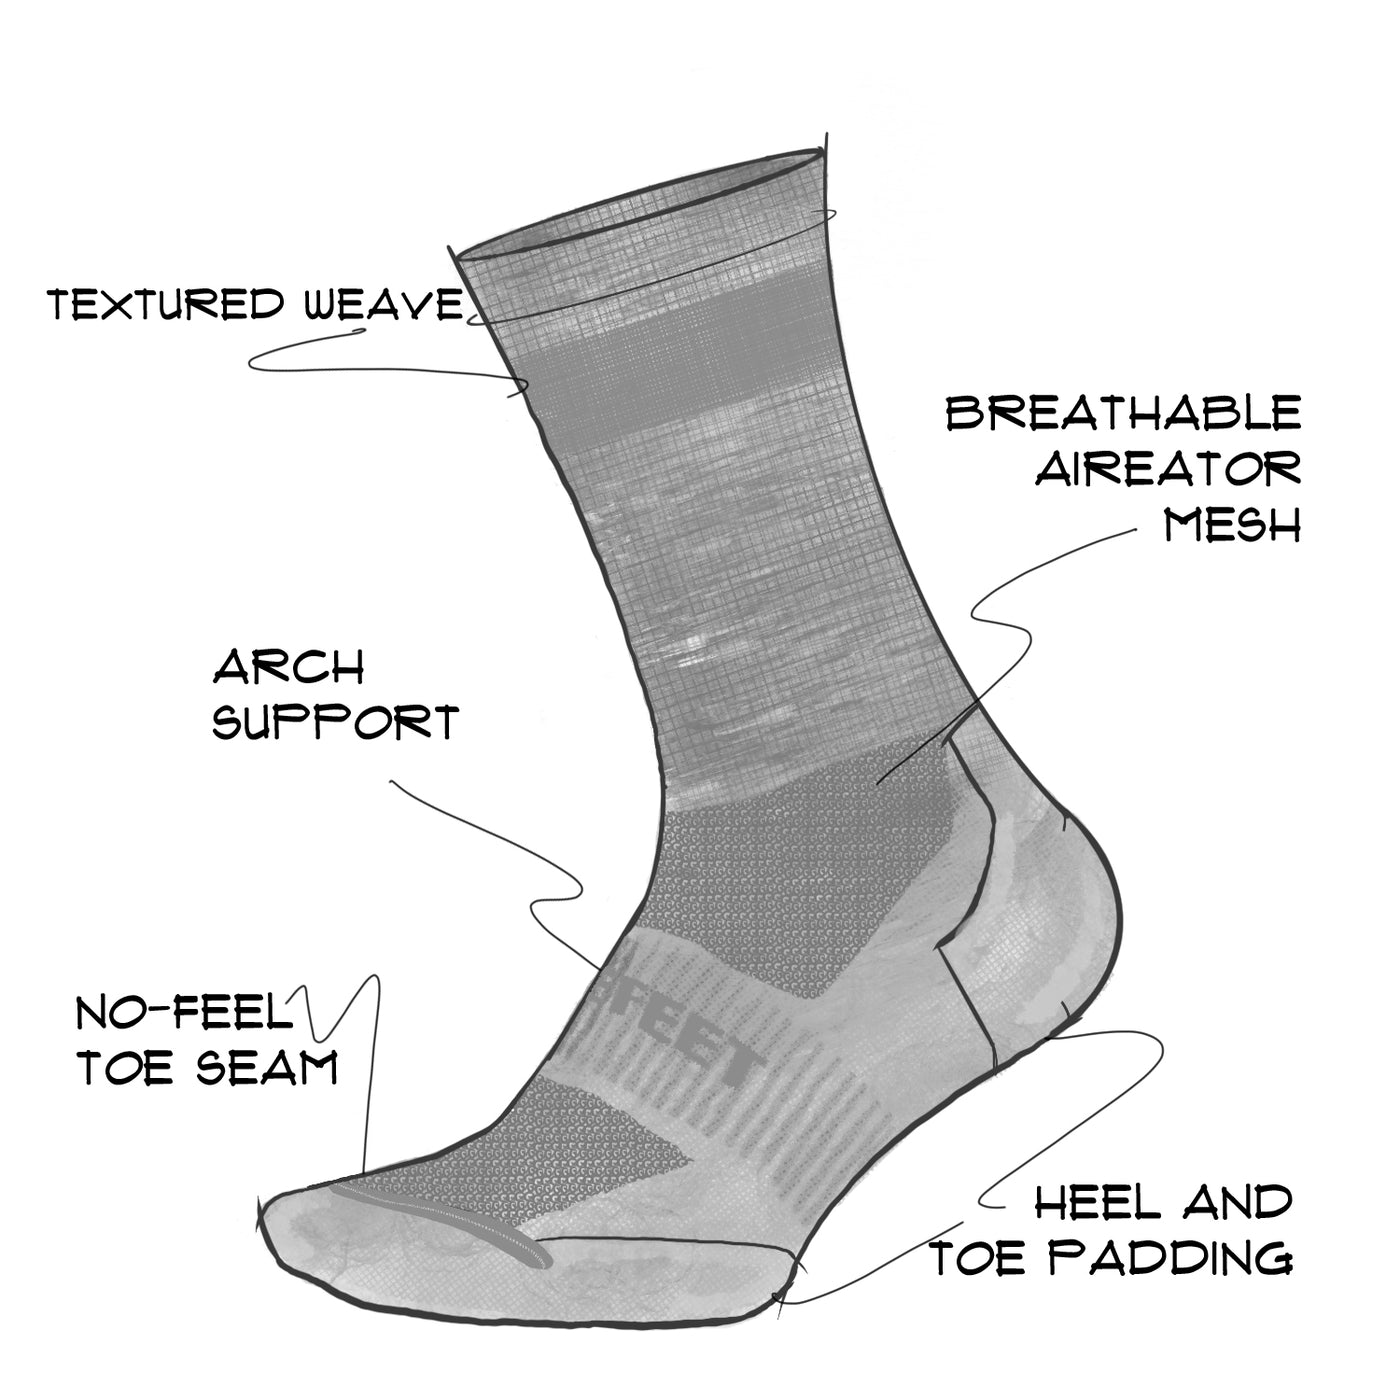 technical drawing of a Cush cycling sock showing features like no-feel toe seam, foot padding, and arch support